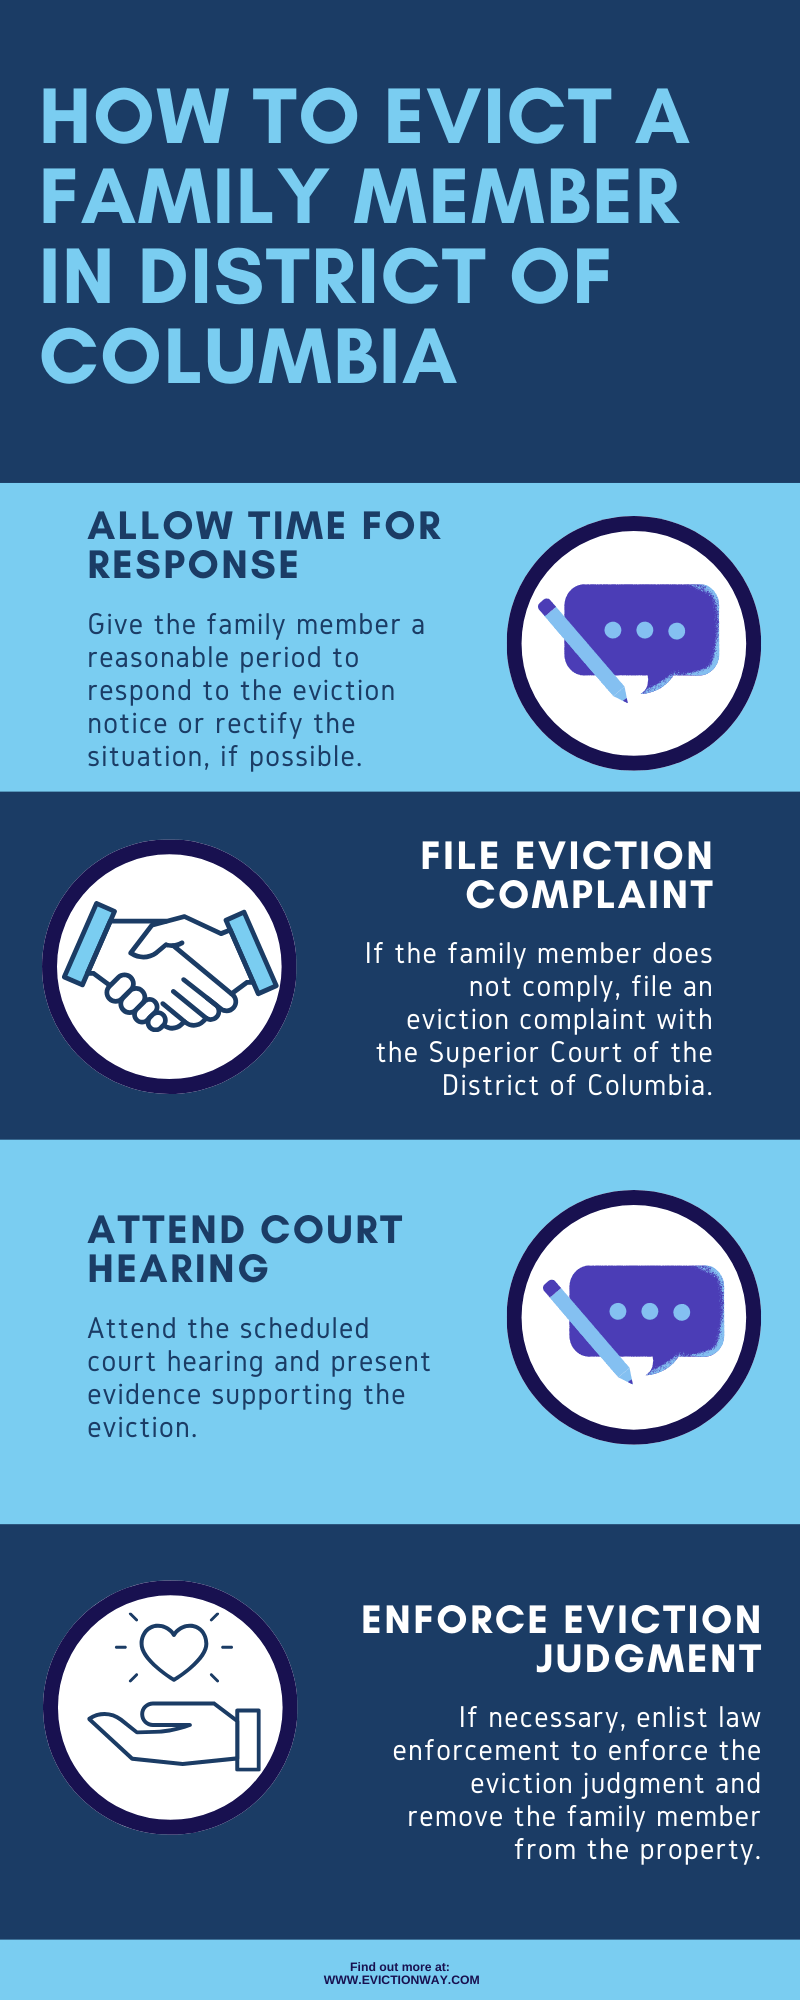 How to Evict a Family Member in District of Columbia